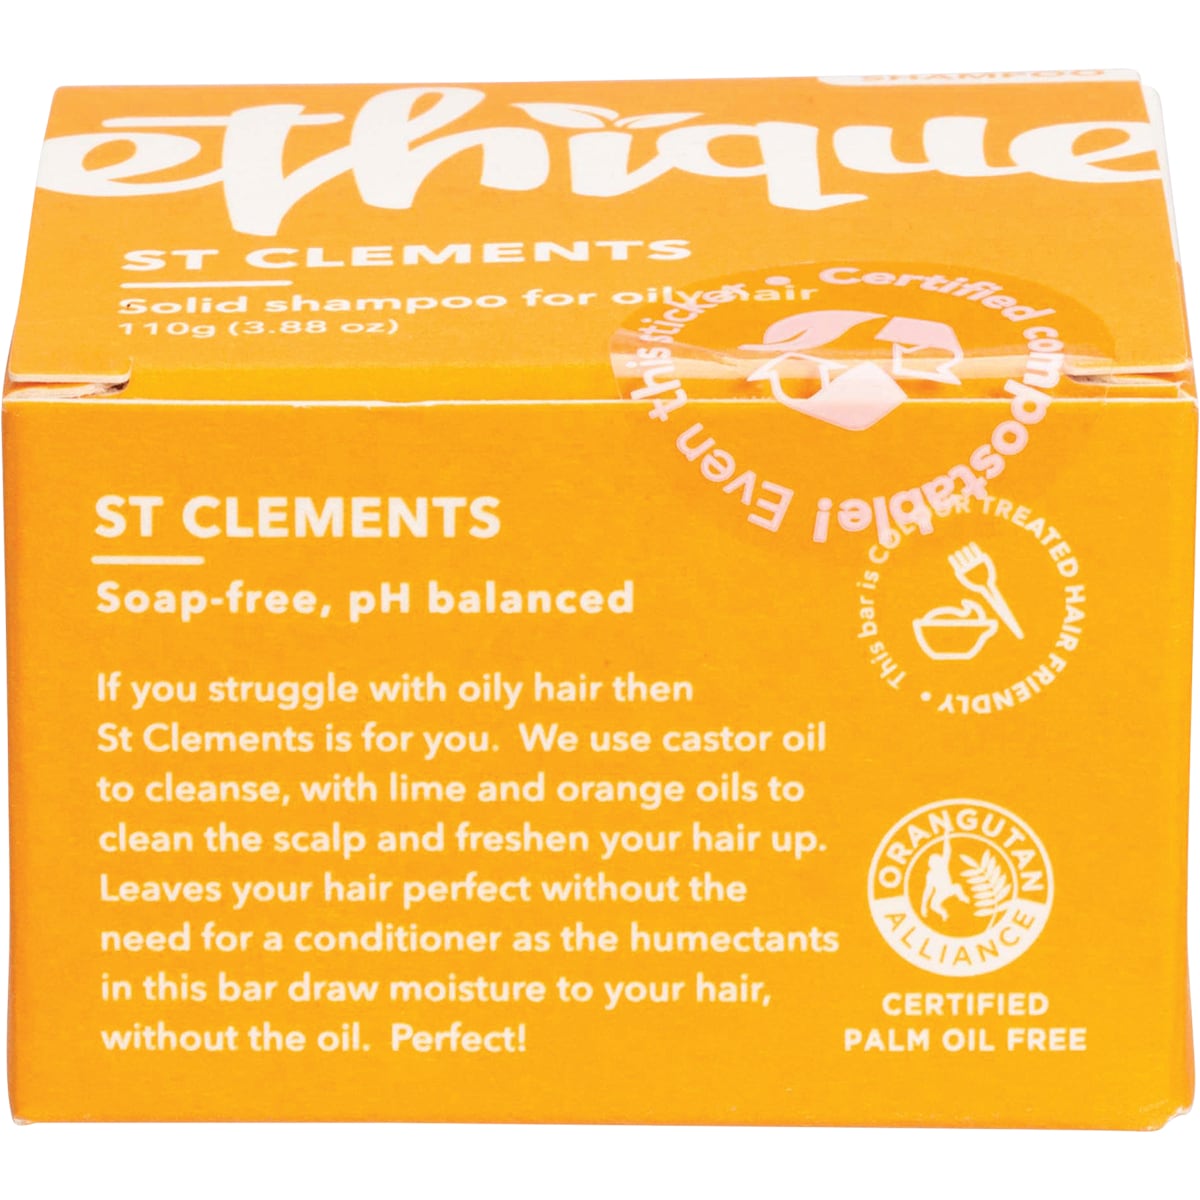 Ethique Solid Shampoo Bar St Clements Oily Hair 110G